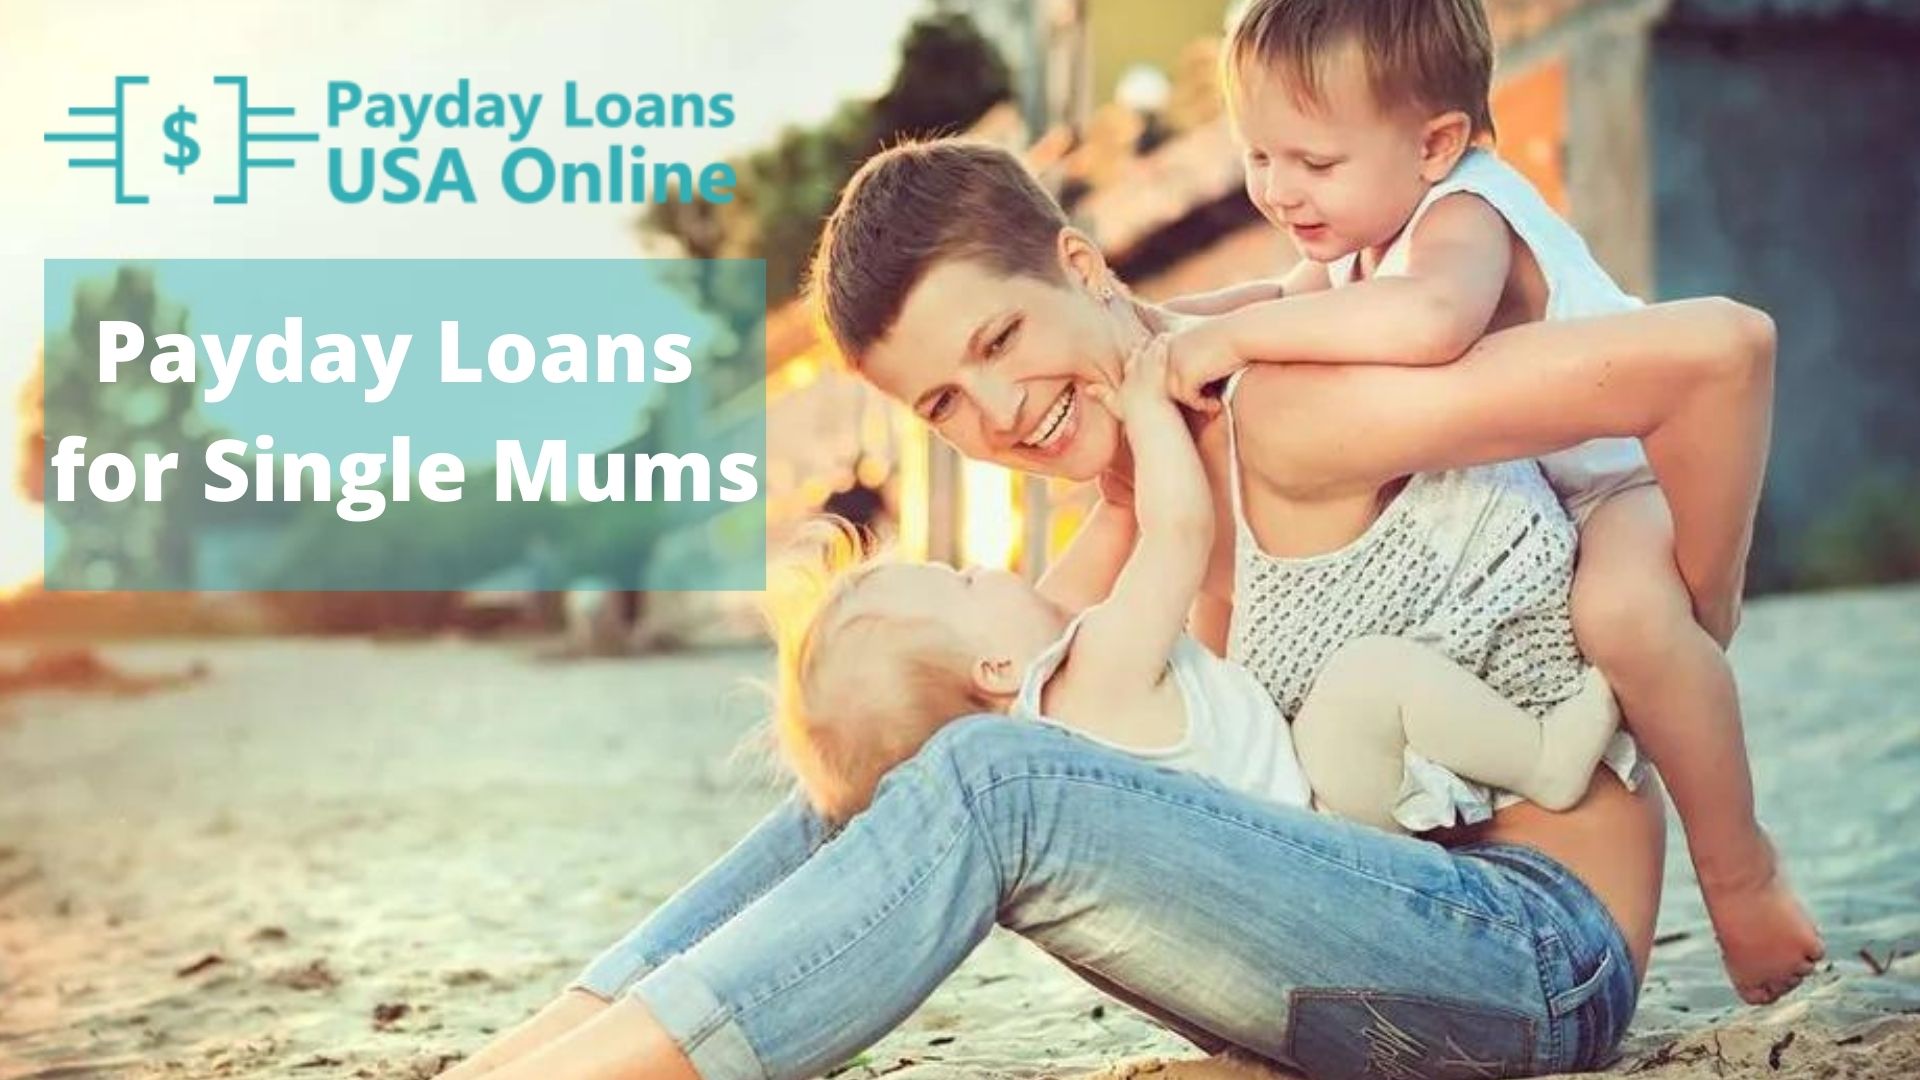 Payday Loans for Single Mums